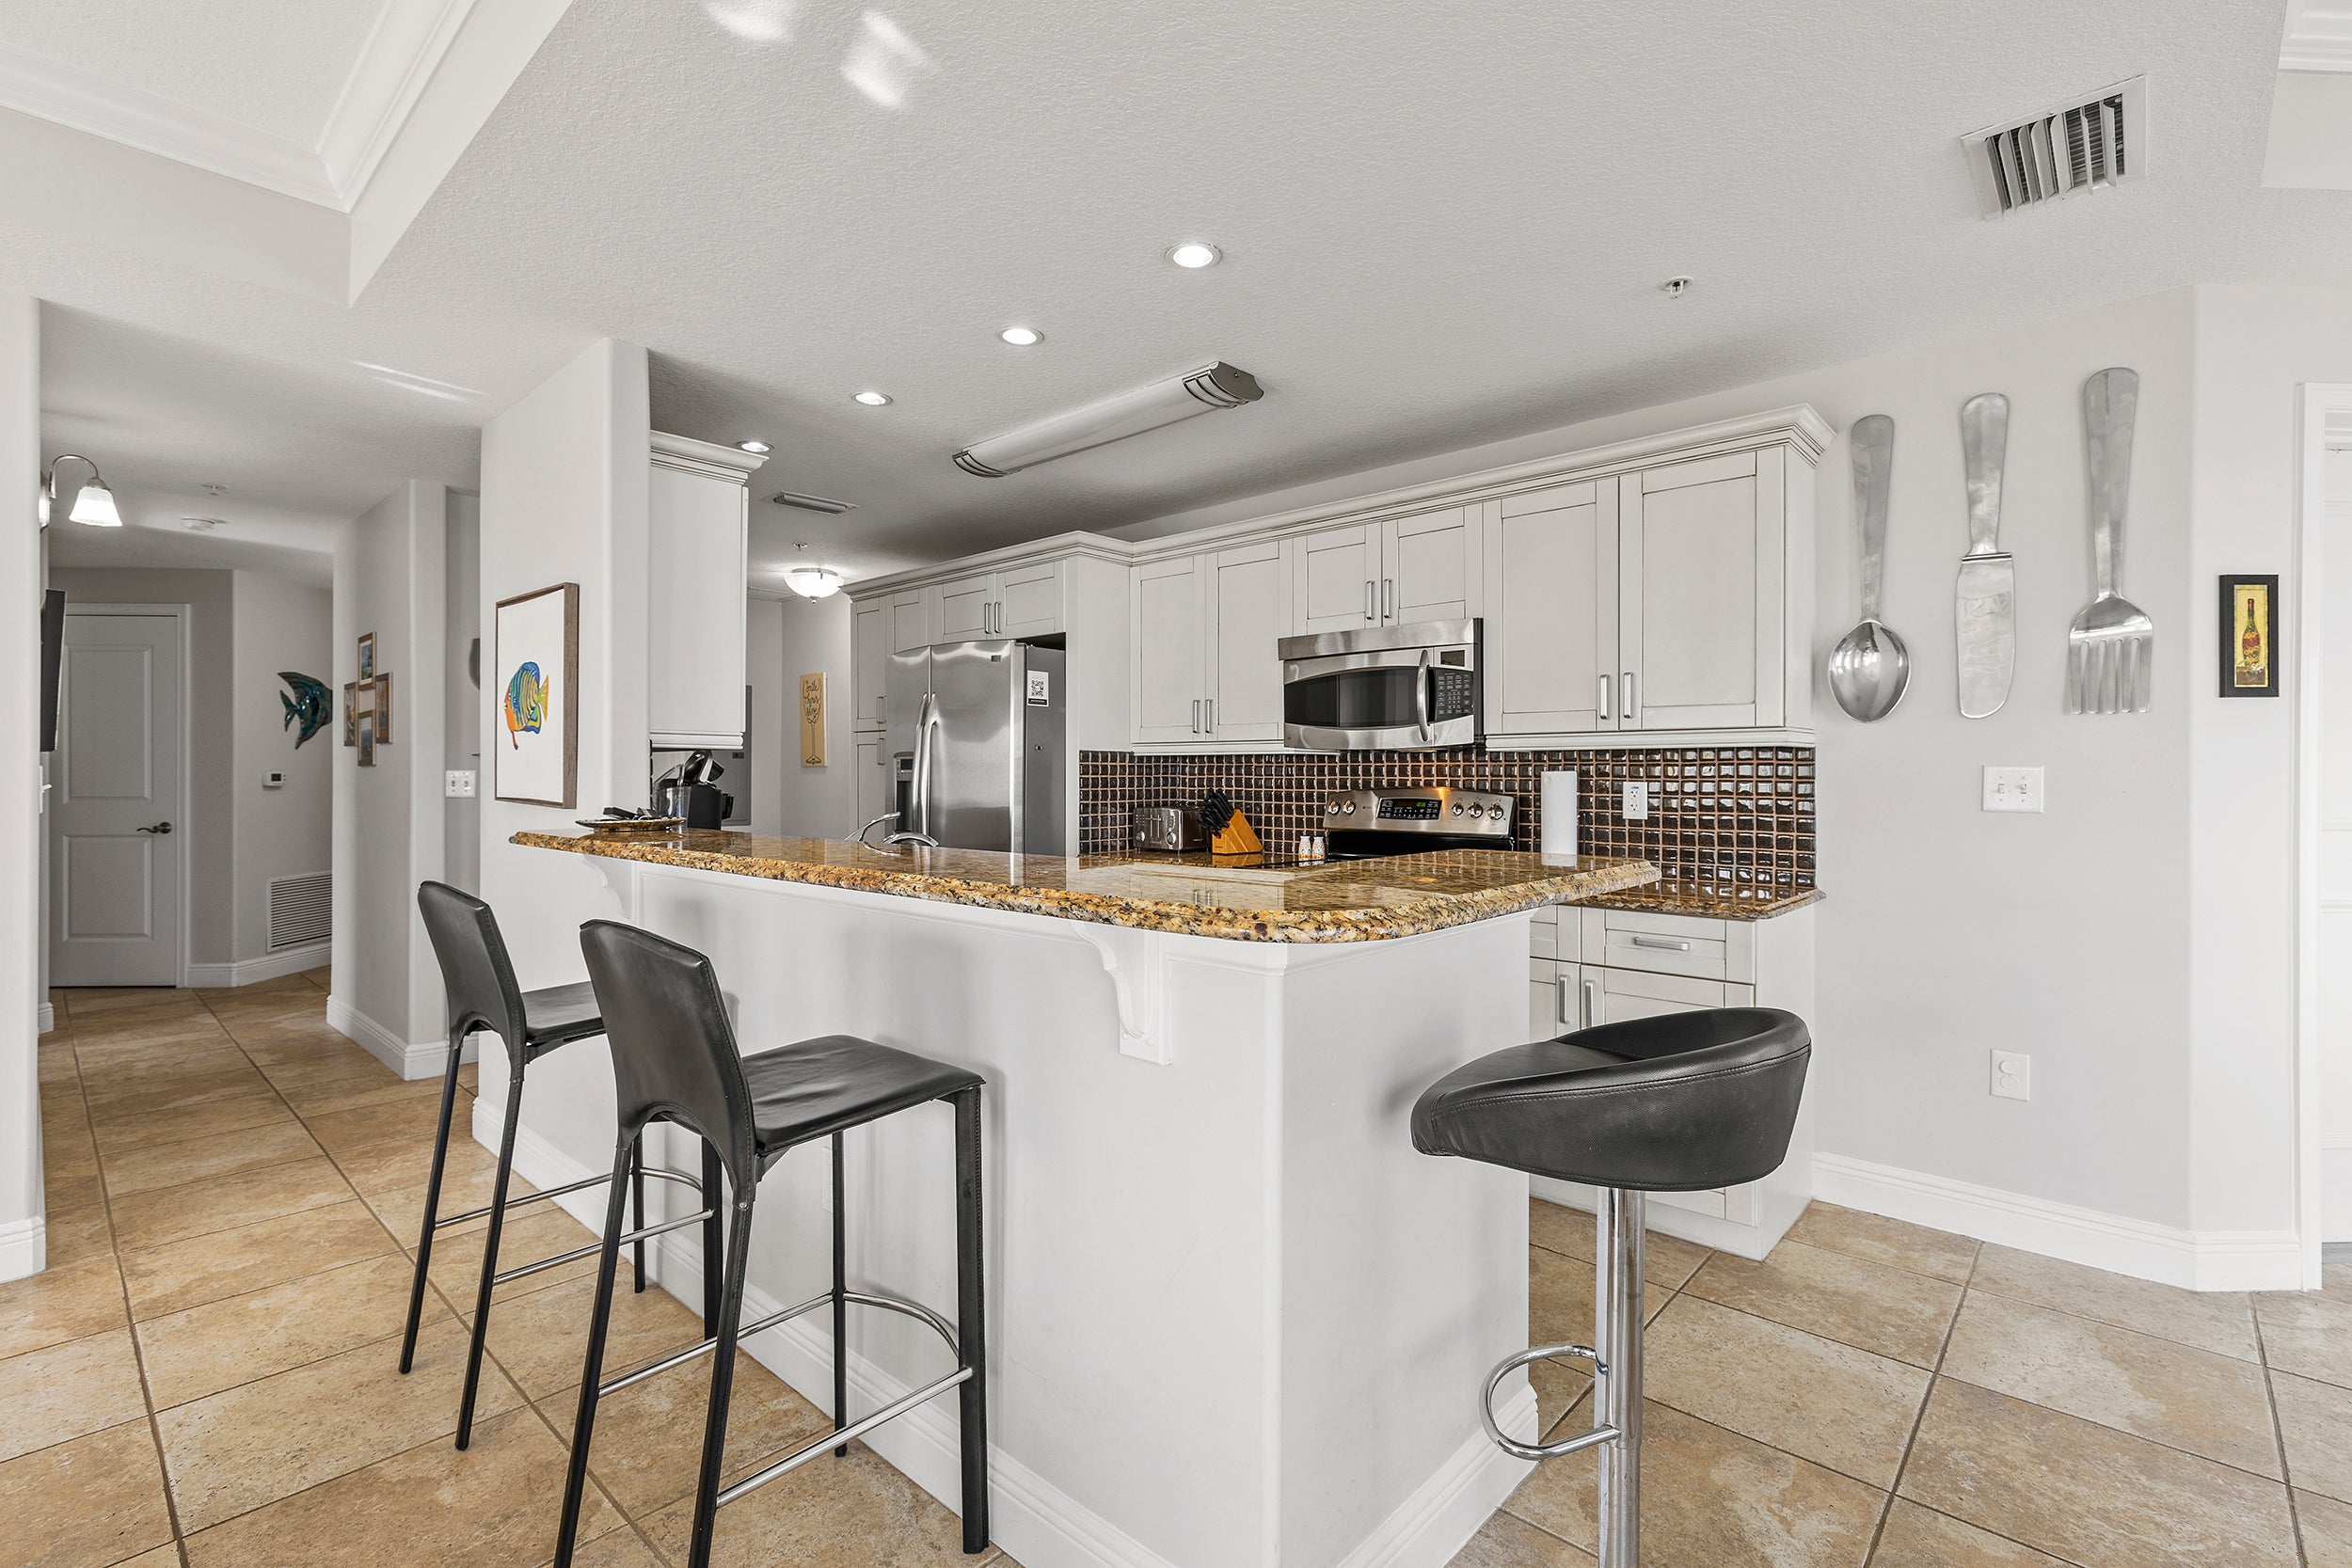 Modern kitchen with counter seating for 2